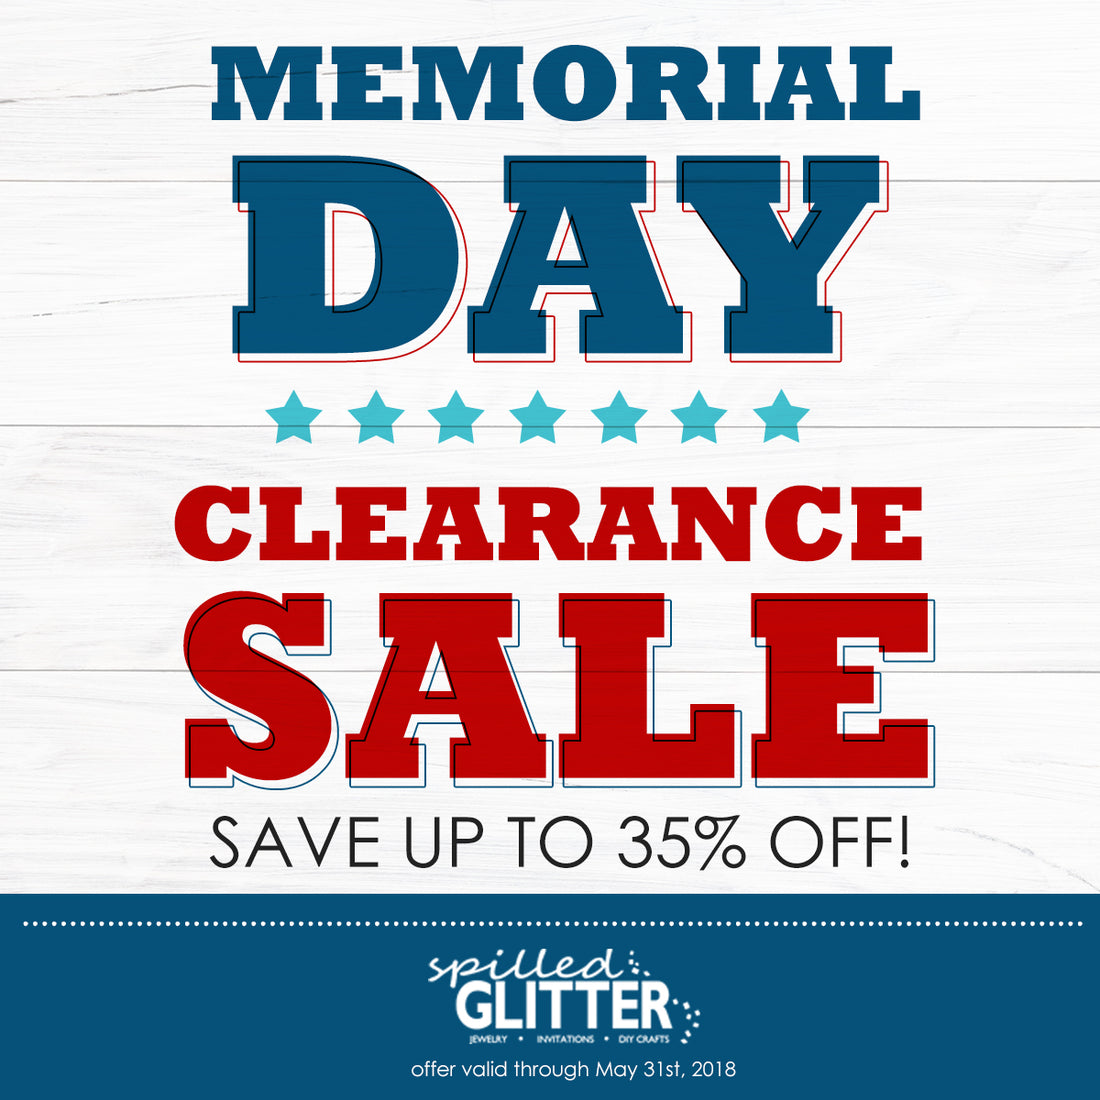 2018 Memorial Day Jewelry Clearance Sale